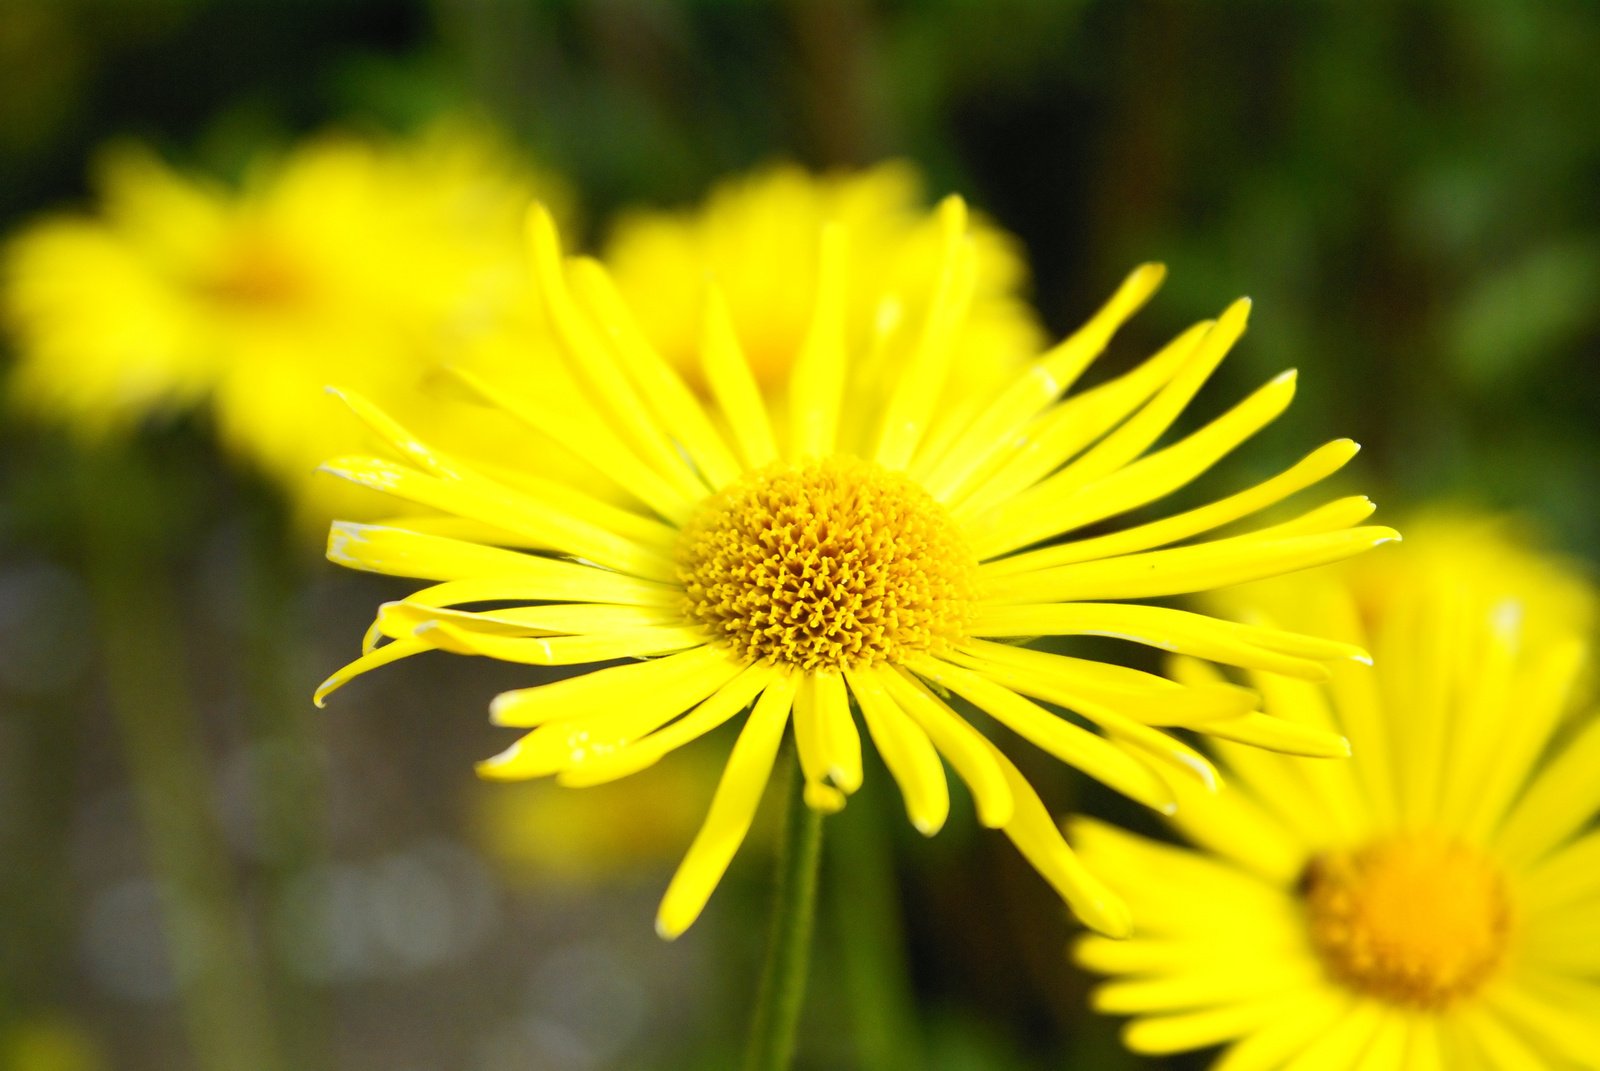 yellow daisies in front of blurry background